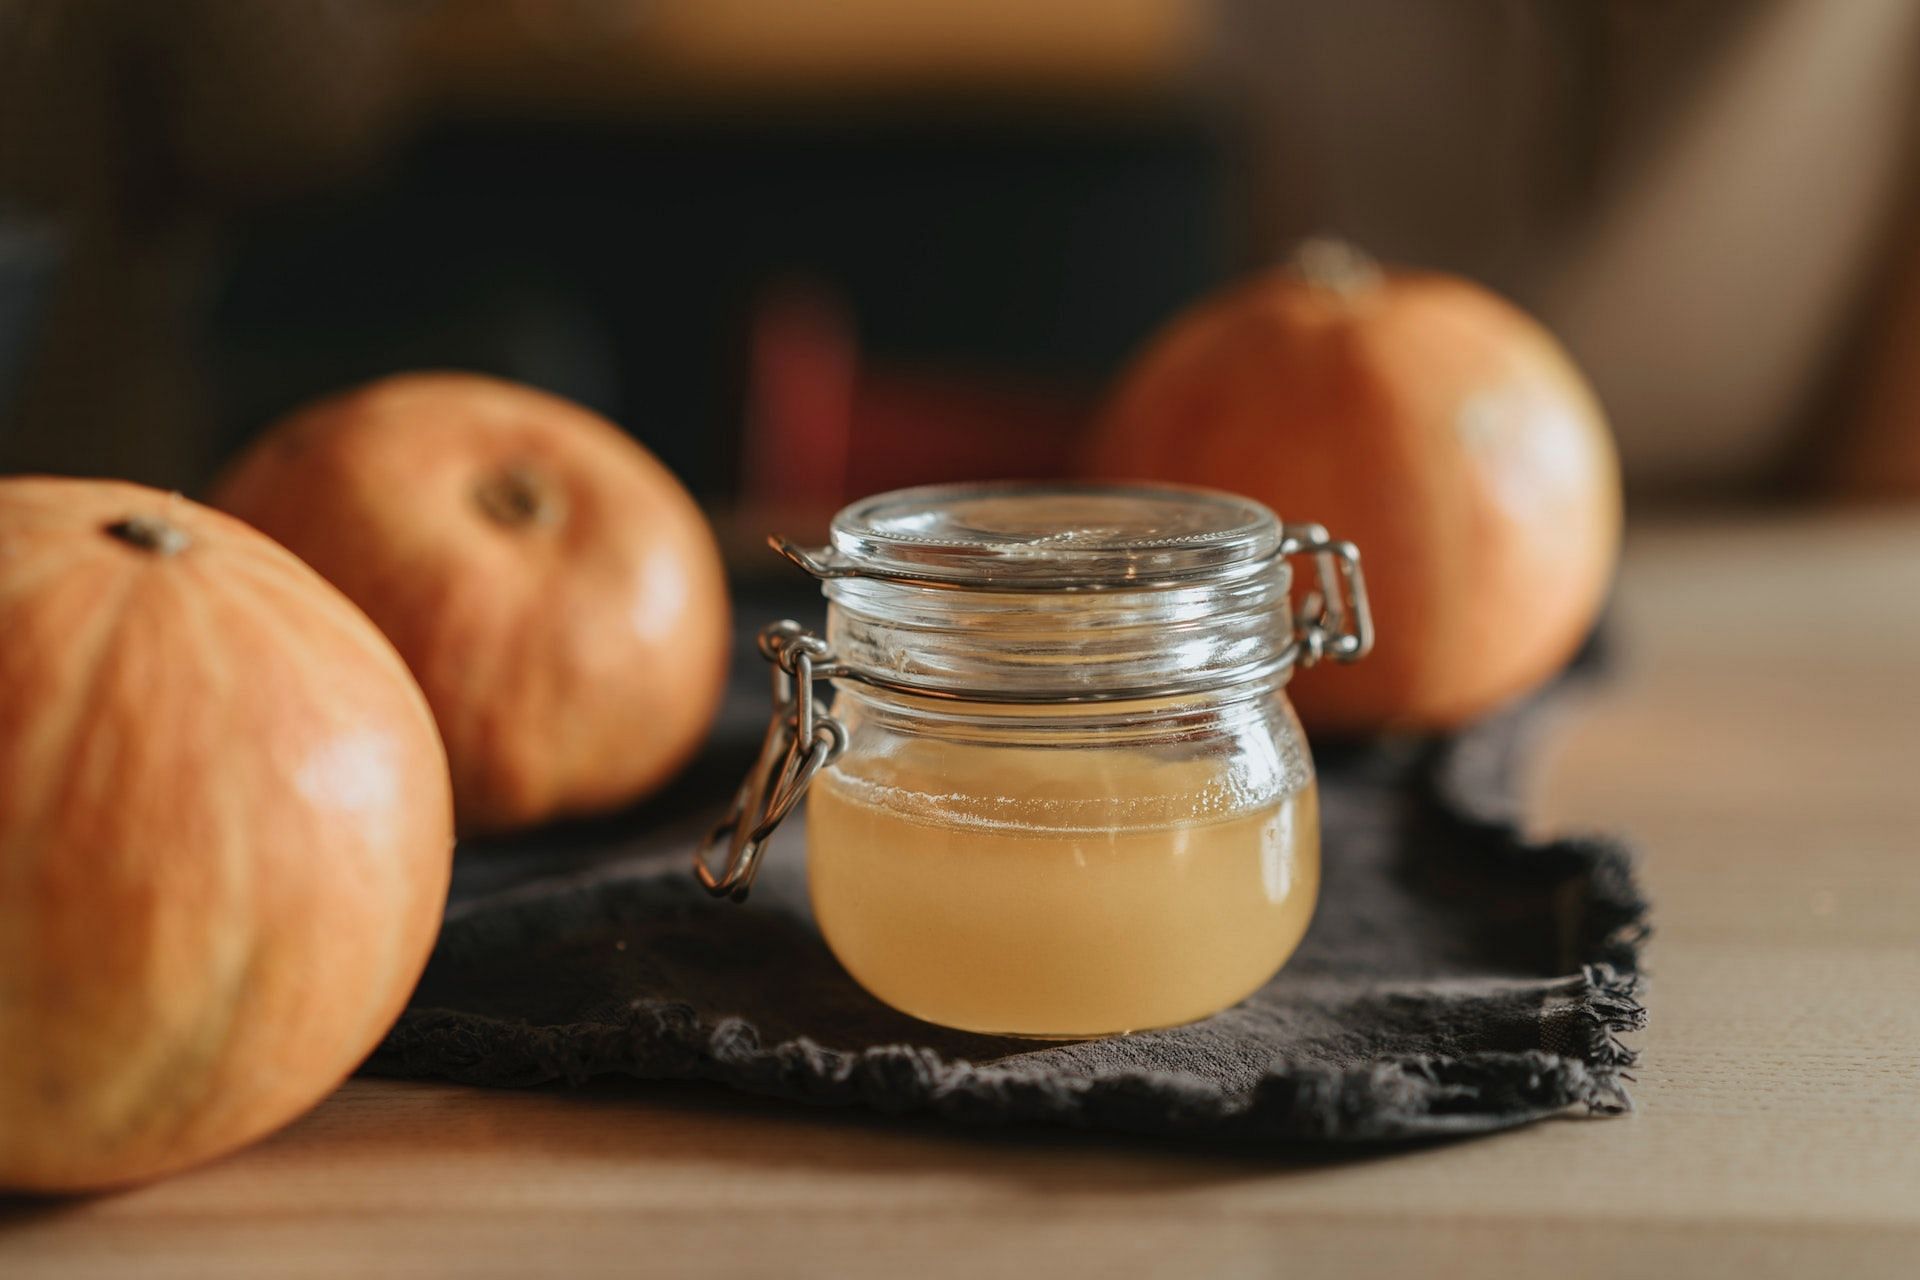 Apple cider vinegar mixed with water replenishes the body. (Photo via Pexels/olia danilevich)